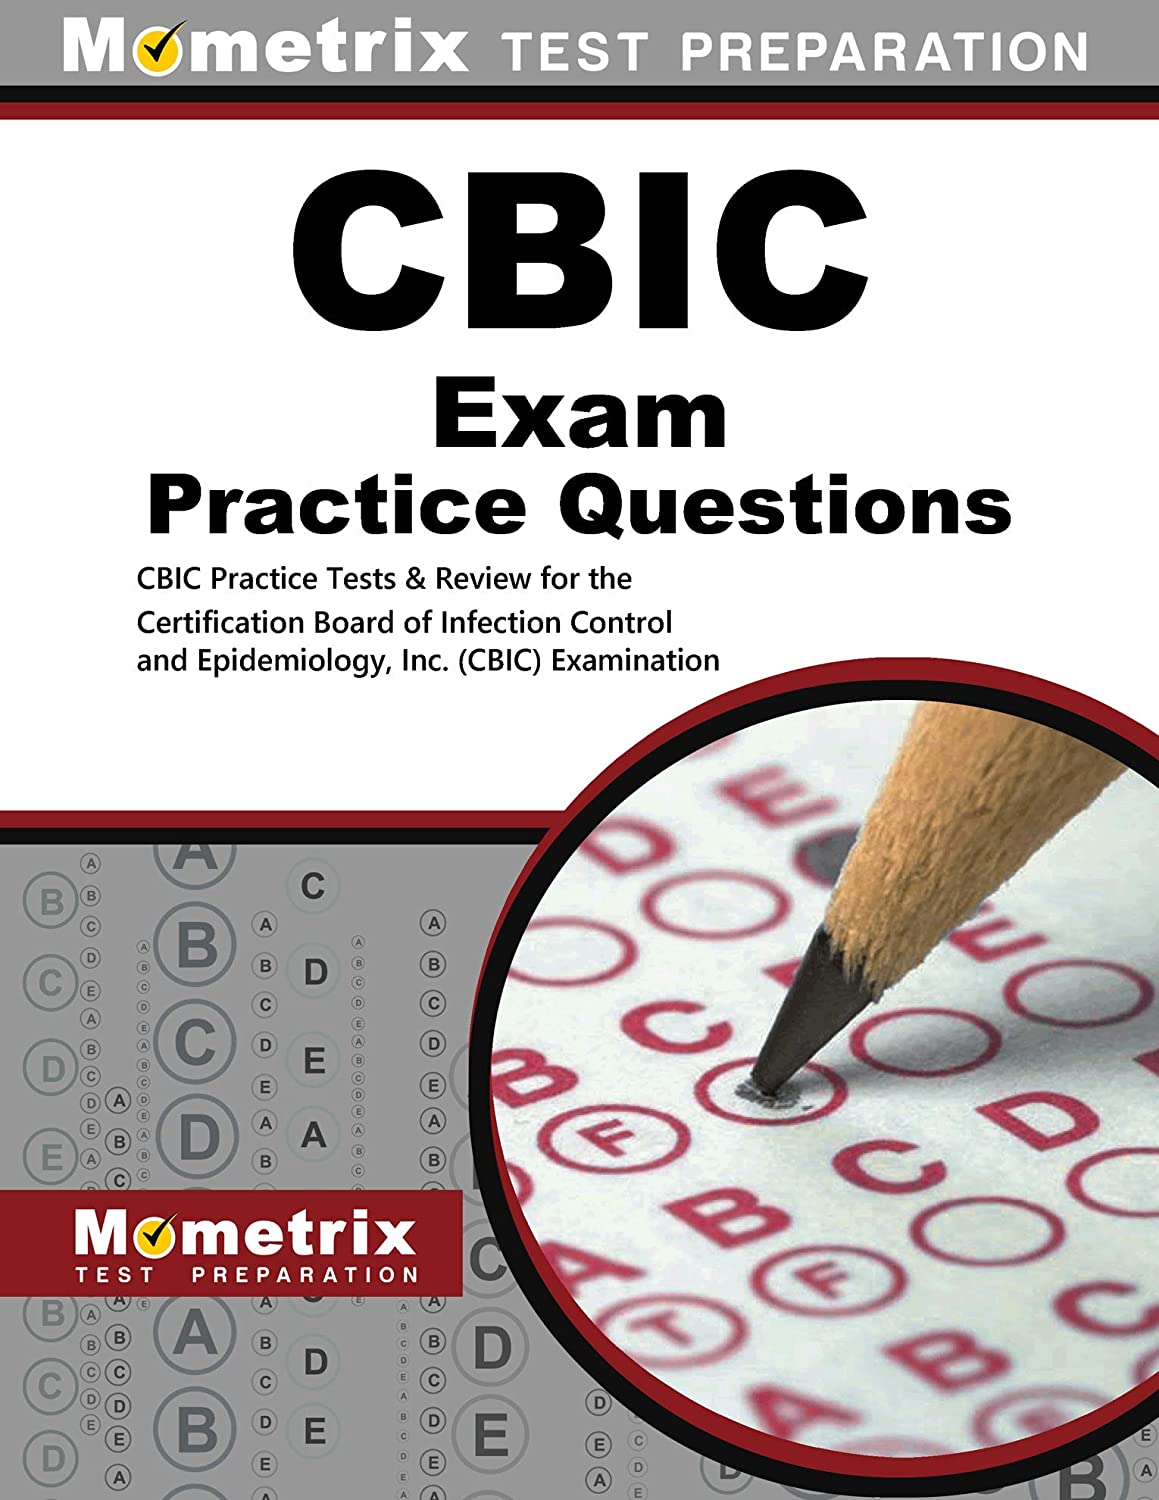 CBIC Exam Practice Questions: CBIC Practice Tests & Review for the Certification Board of Infection Control and Epidemiology, Inc. (CBIC) Examination